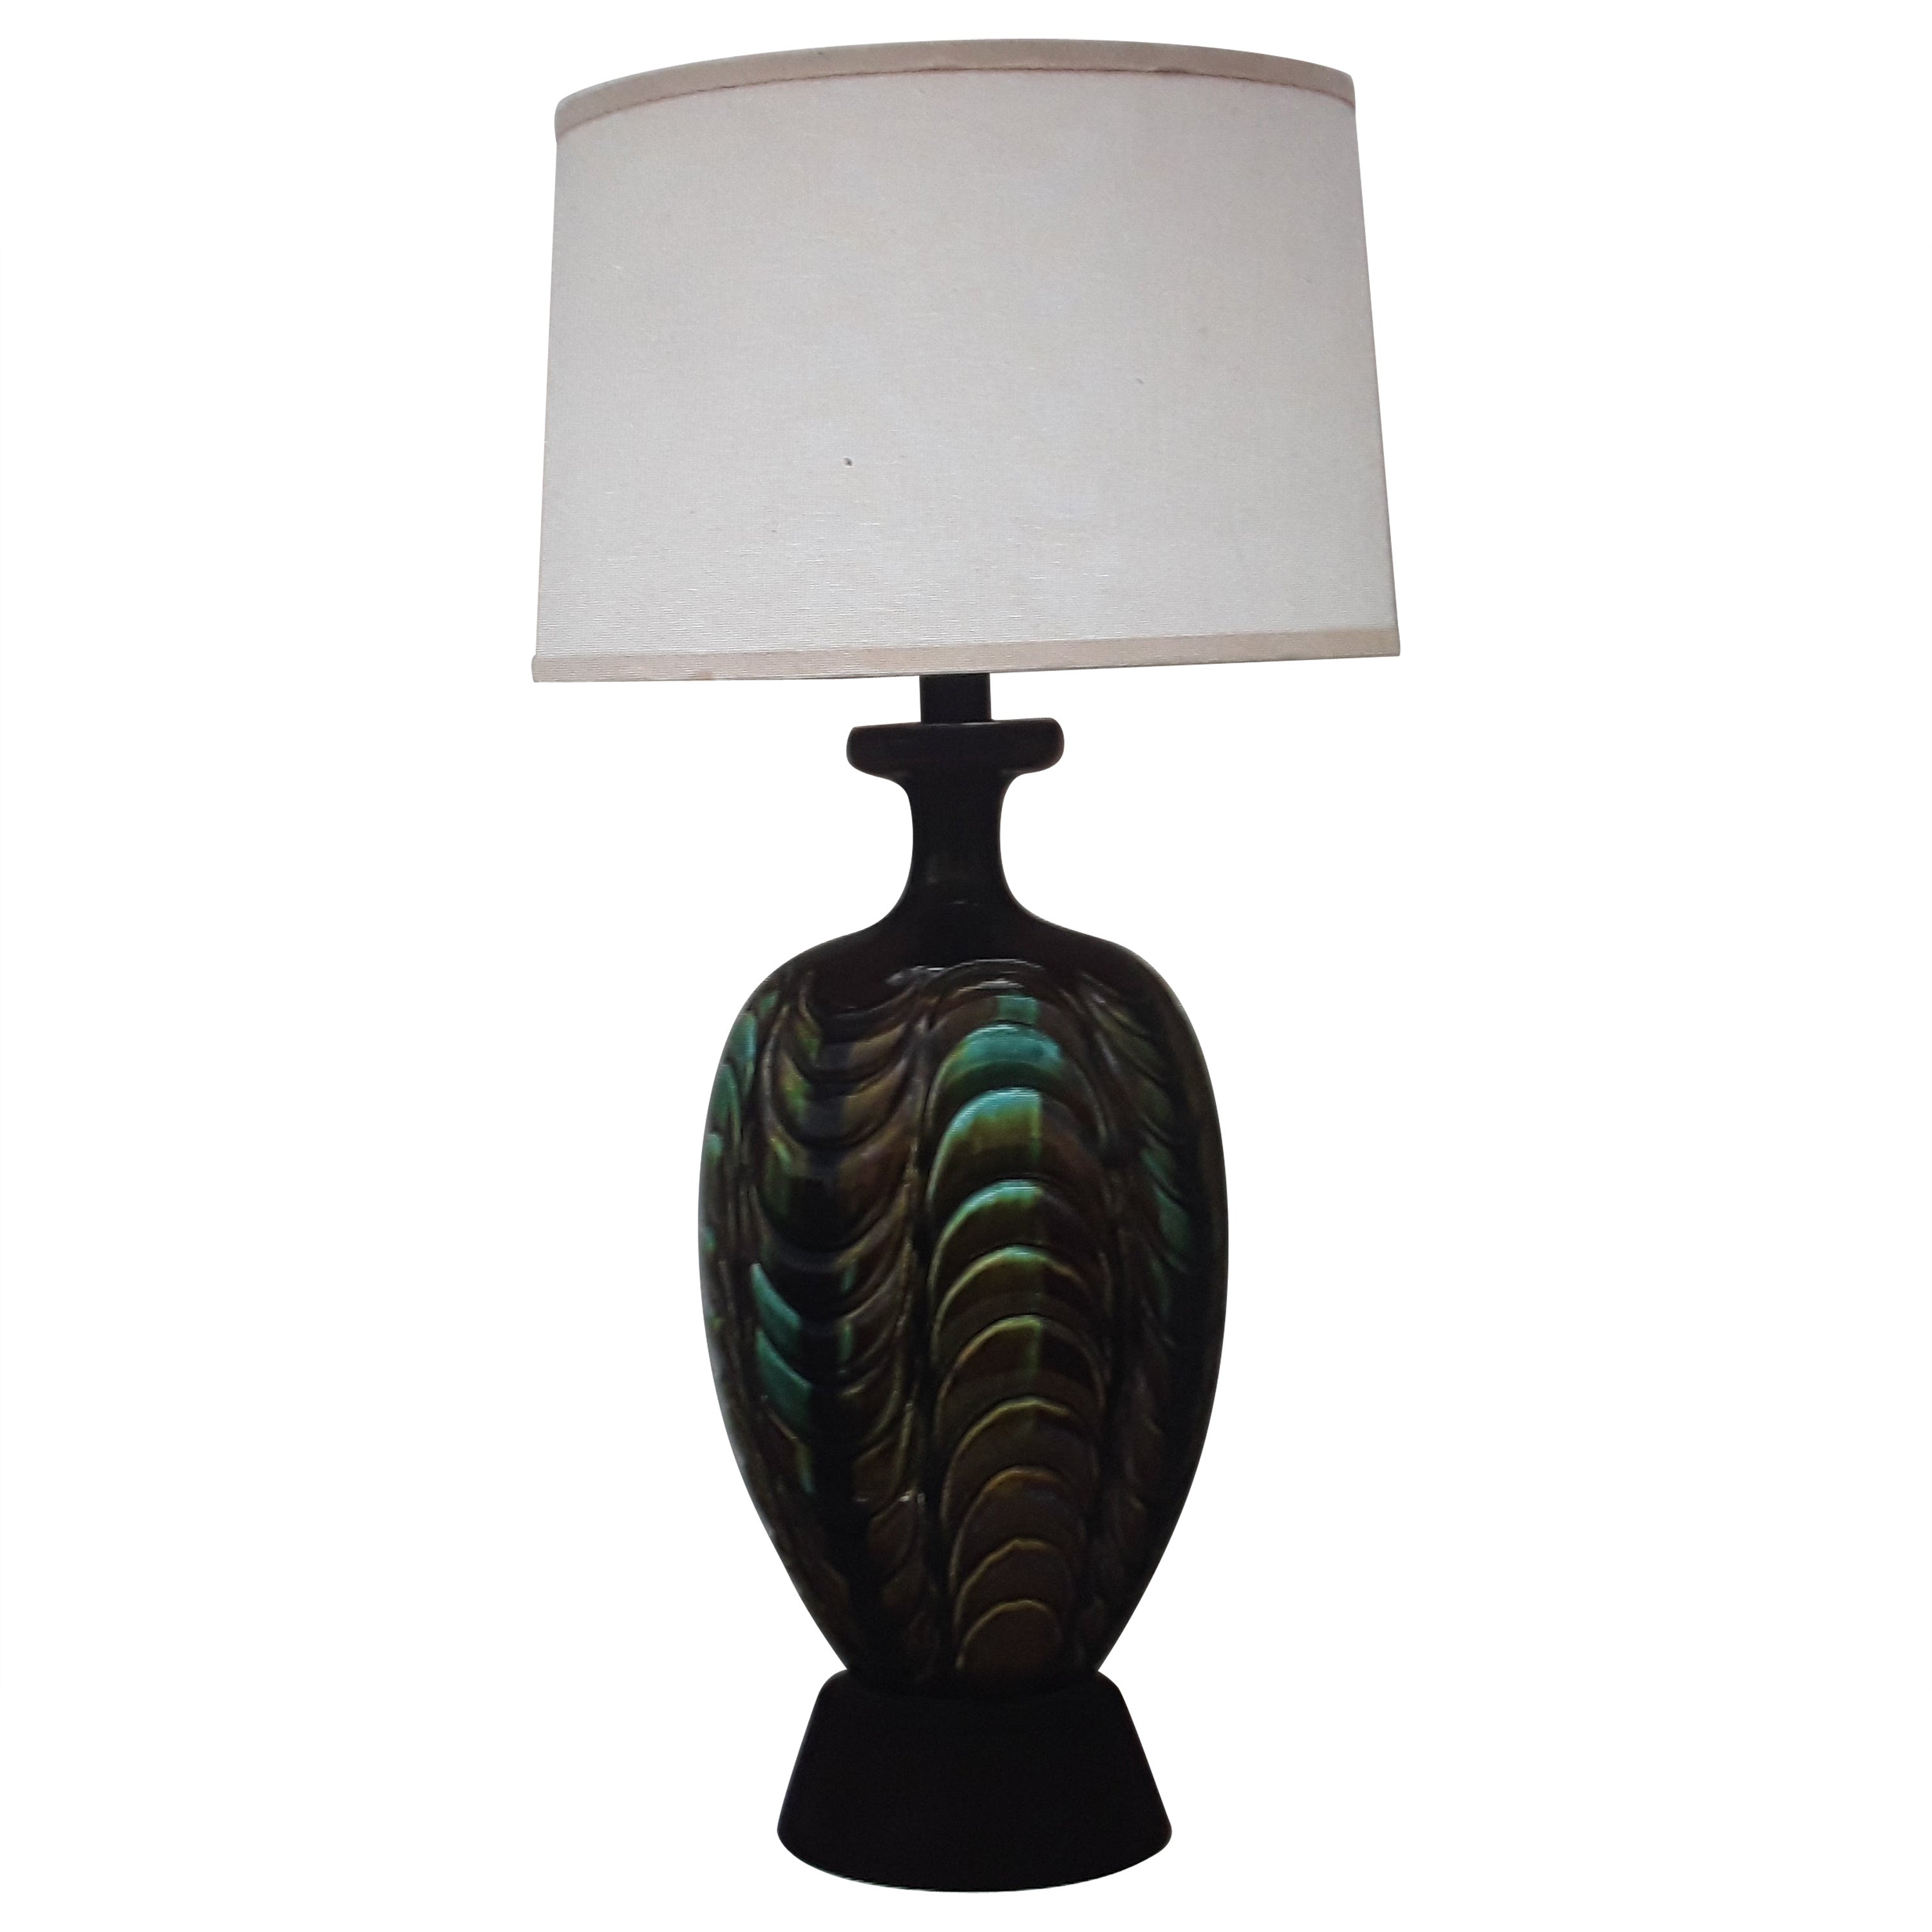 1940's Hollywood Regency Multi Color Earth Tones Glazed Table Lamp With Shade For Sale